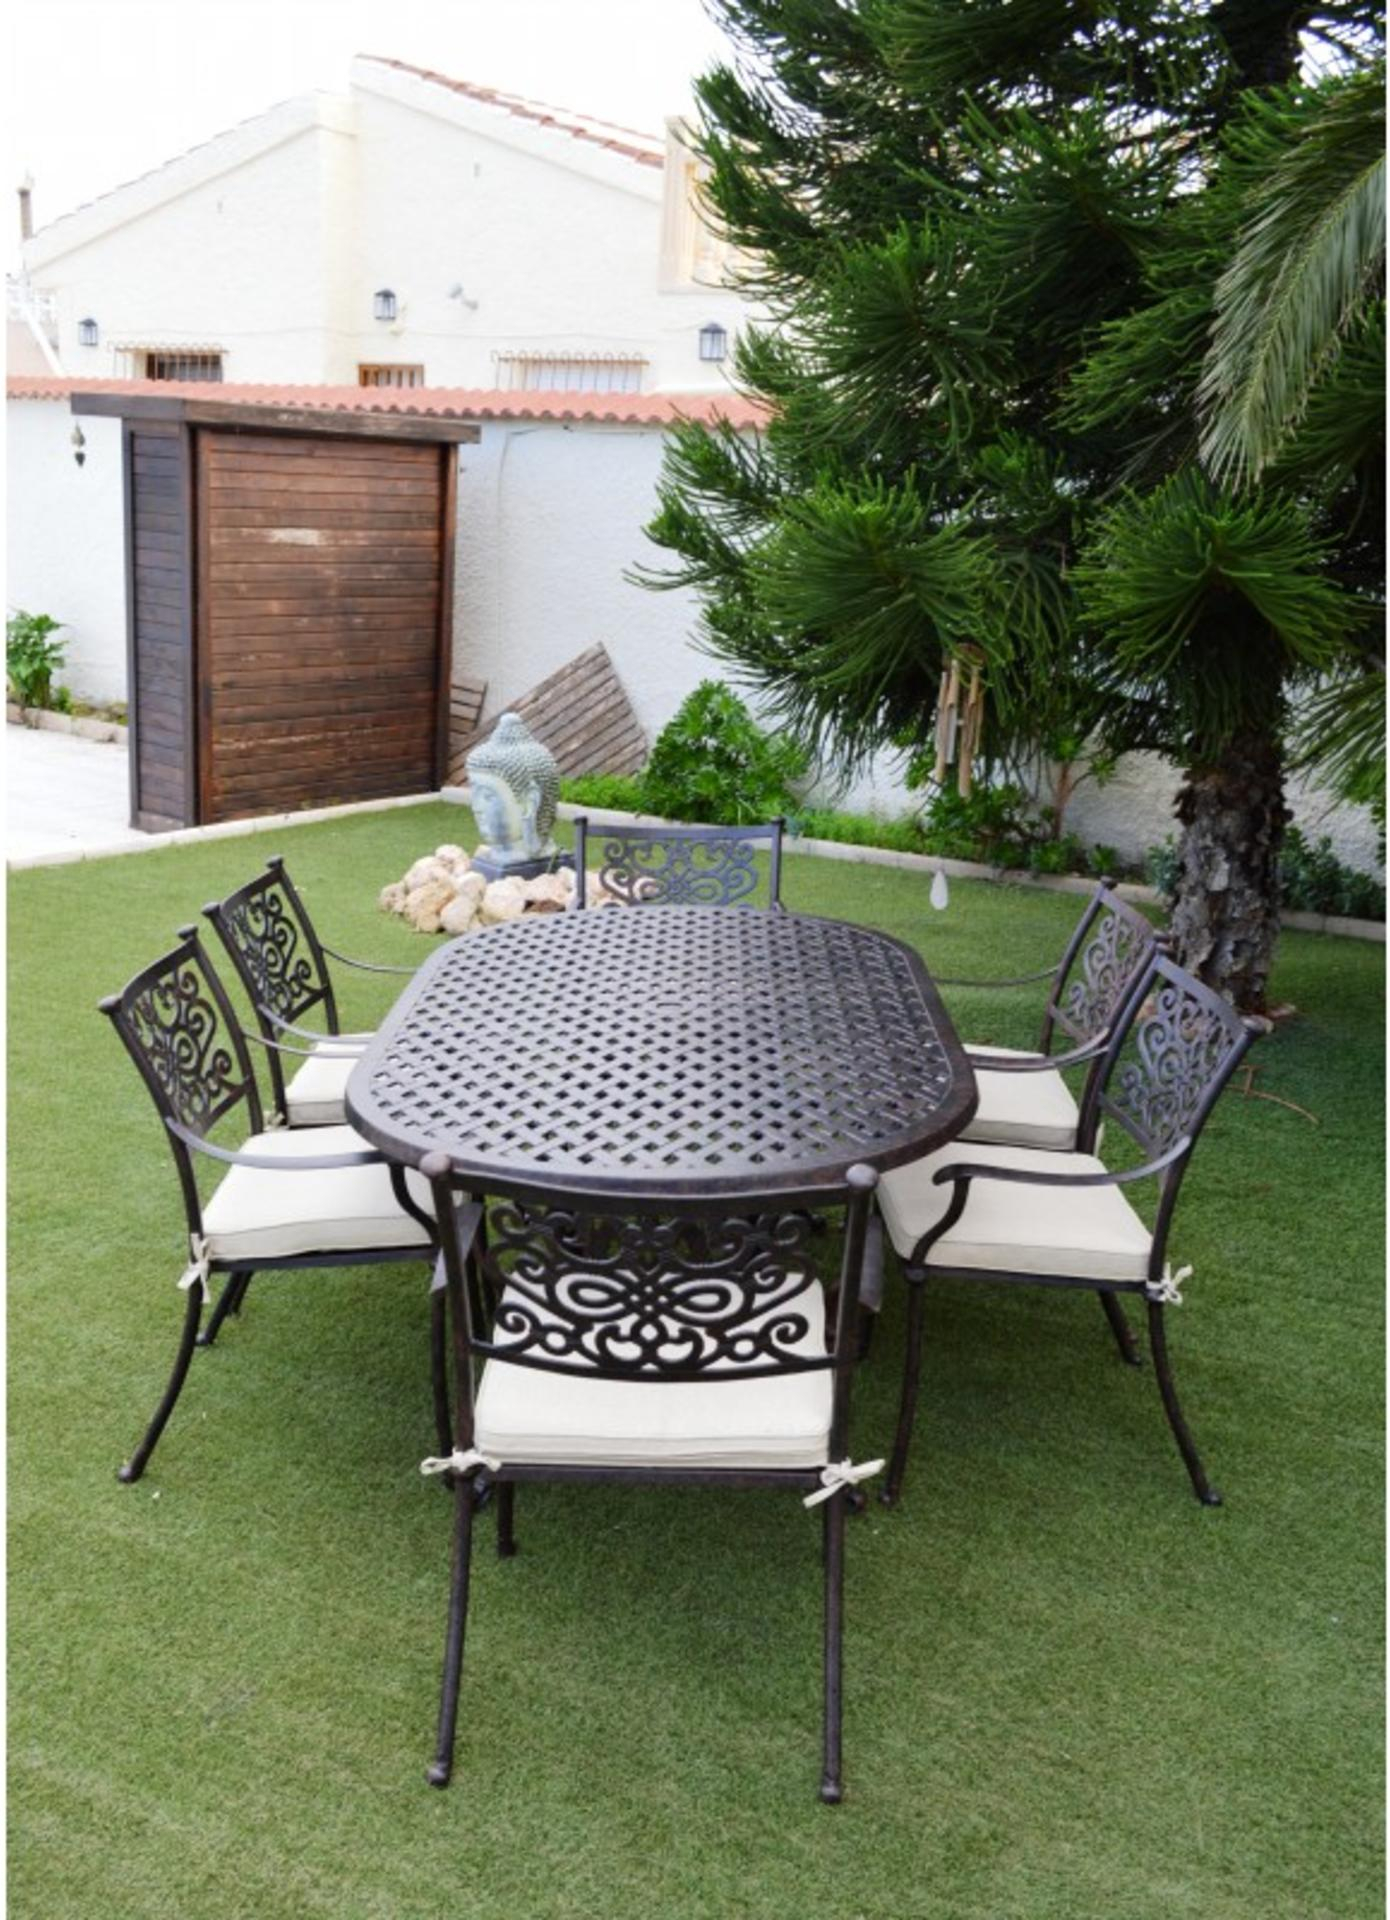 Almeria Oval Oblong 6 Seater Patio Set Inspired 4 Furniture intended for sizing 1390 X 1920